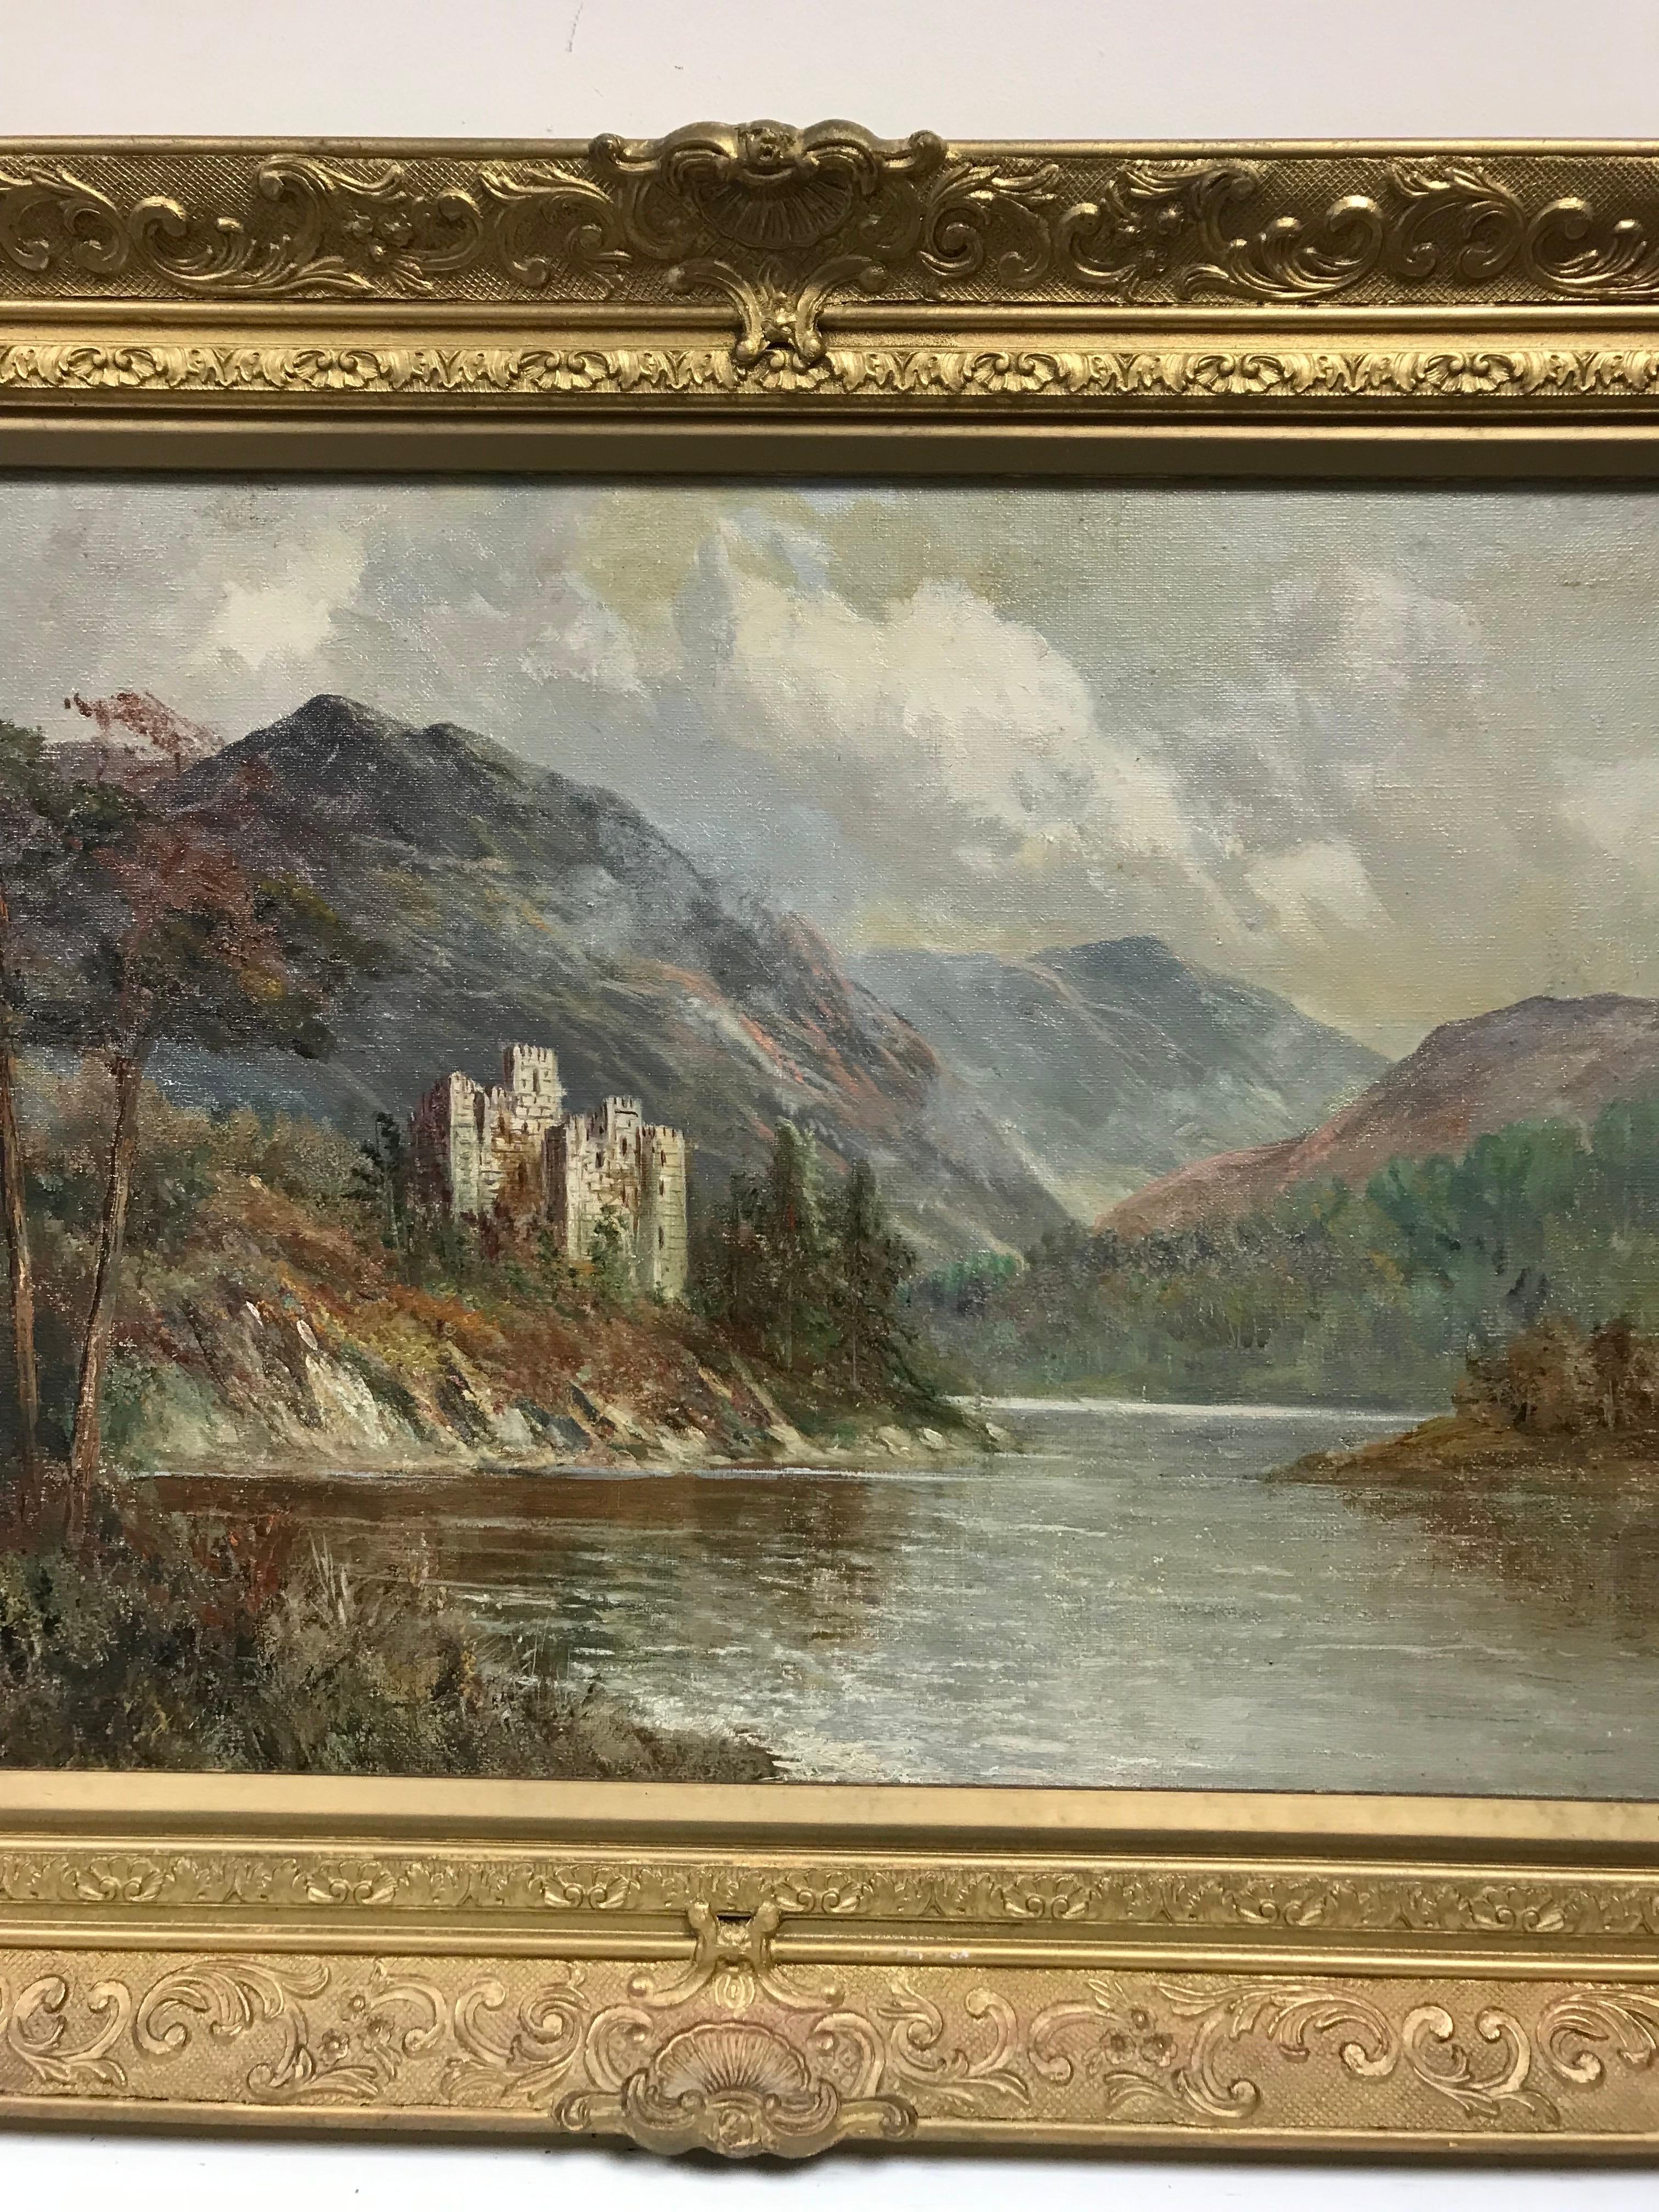 Artist/ School: F. E. Jamieson British, signed verso

Title: The Ancient Castle in the Scottish Highlands

Medium: Oil on canvas, framed

Size:
framed: 22.5 x 30.5 inches
canvas : 16 x 24 inches

Provenance: from a collection in England.